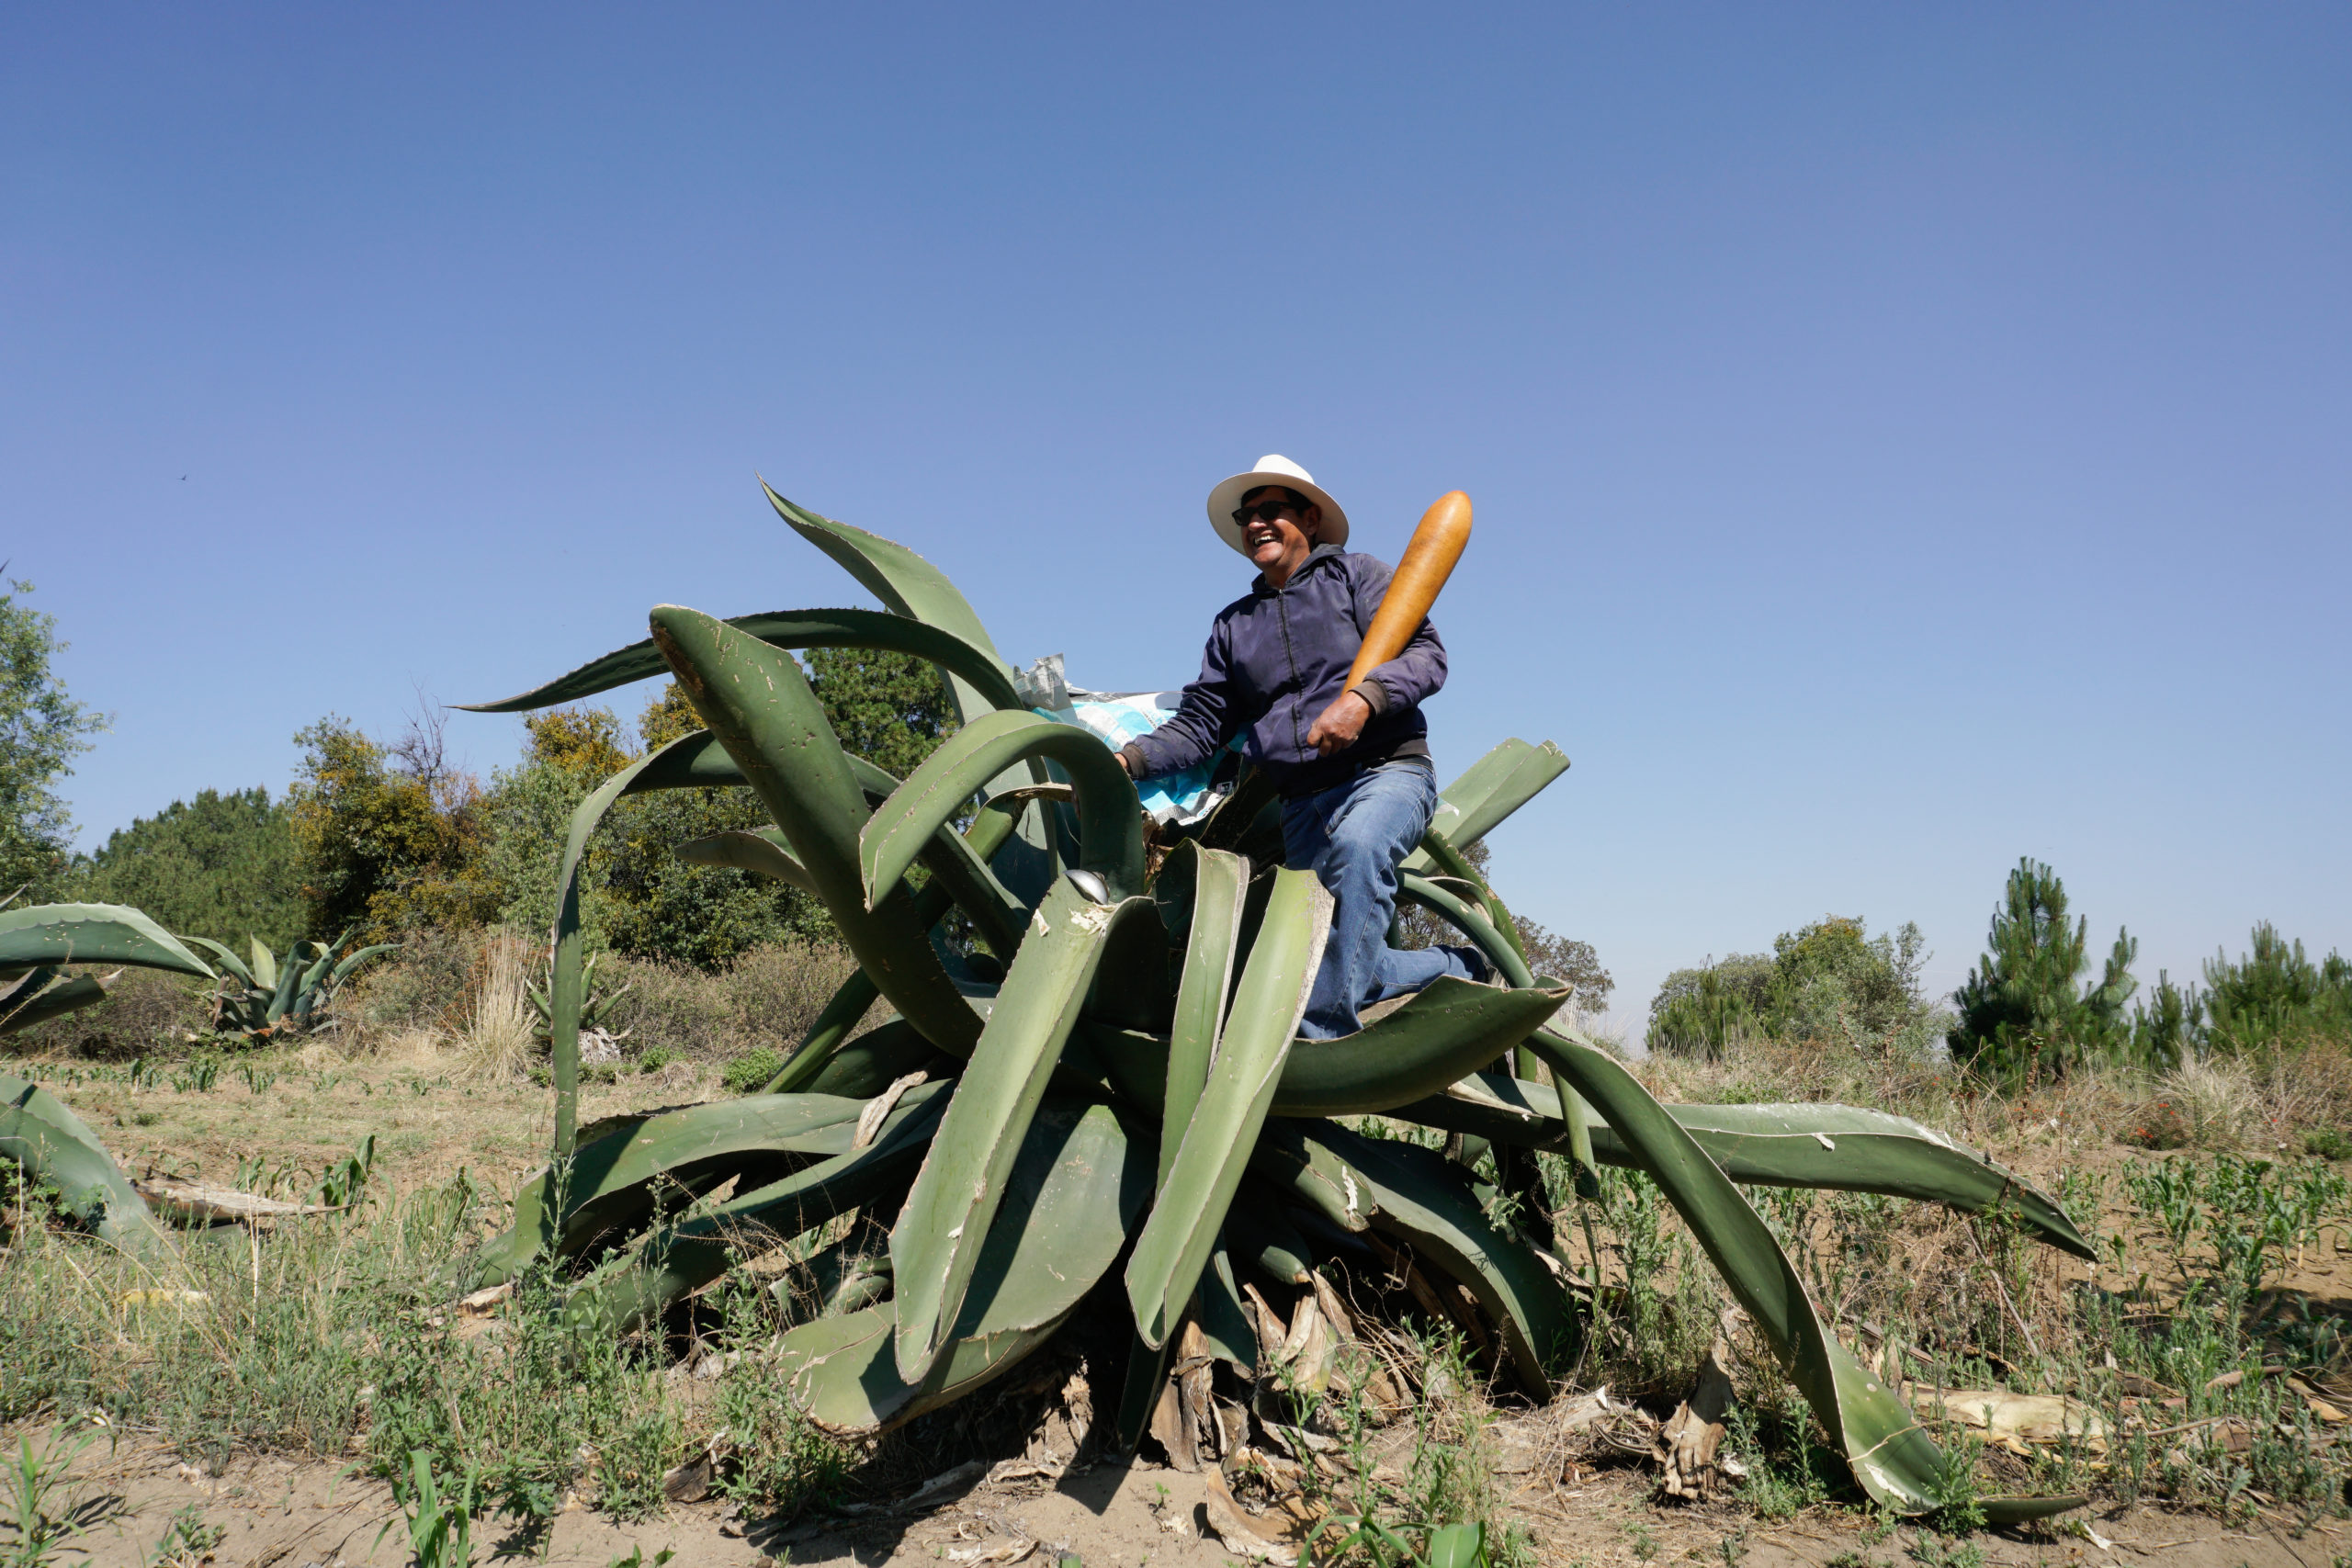 Gaudencio “Shaggy” Díaz, dressed in practical farming clothes, sits atop a maguey agave while holding a large pestle-like acocote, used for scraping sap from the plant.